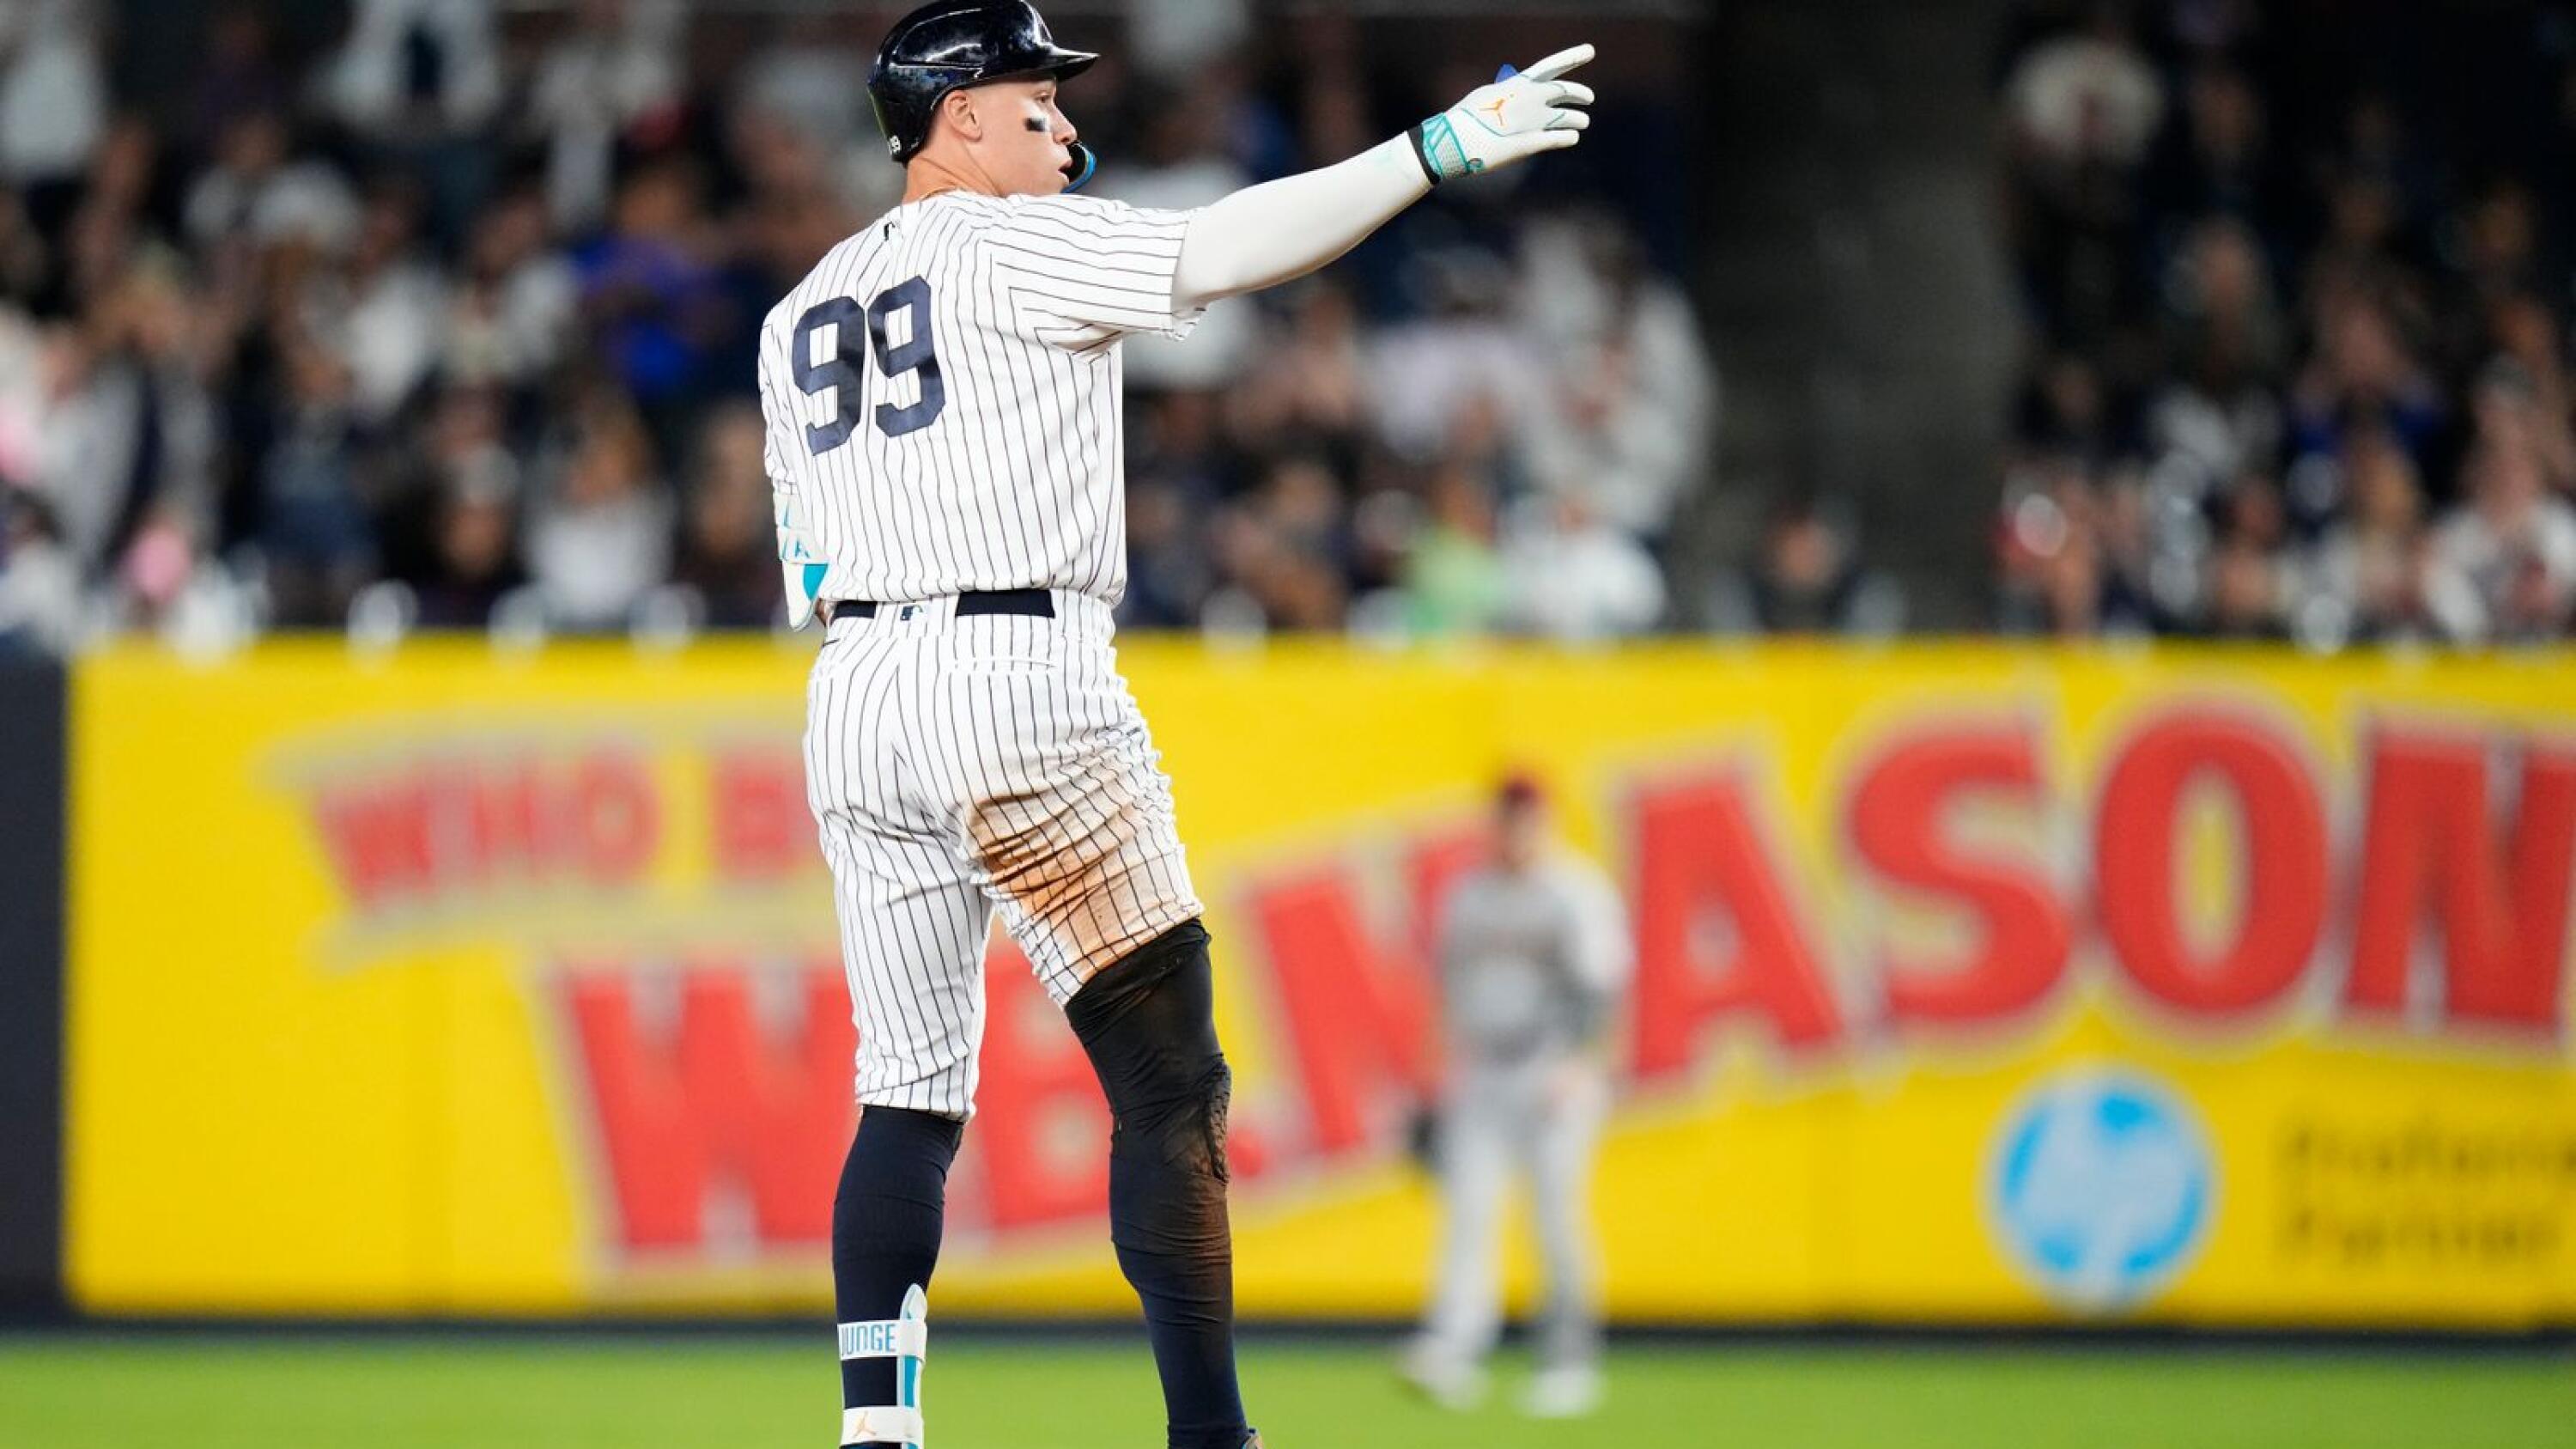 Yankees Fans Have Aaron Judge's Number, All Over Their Backs - The New York  Times